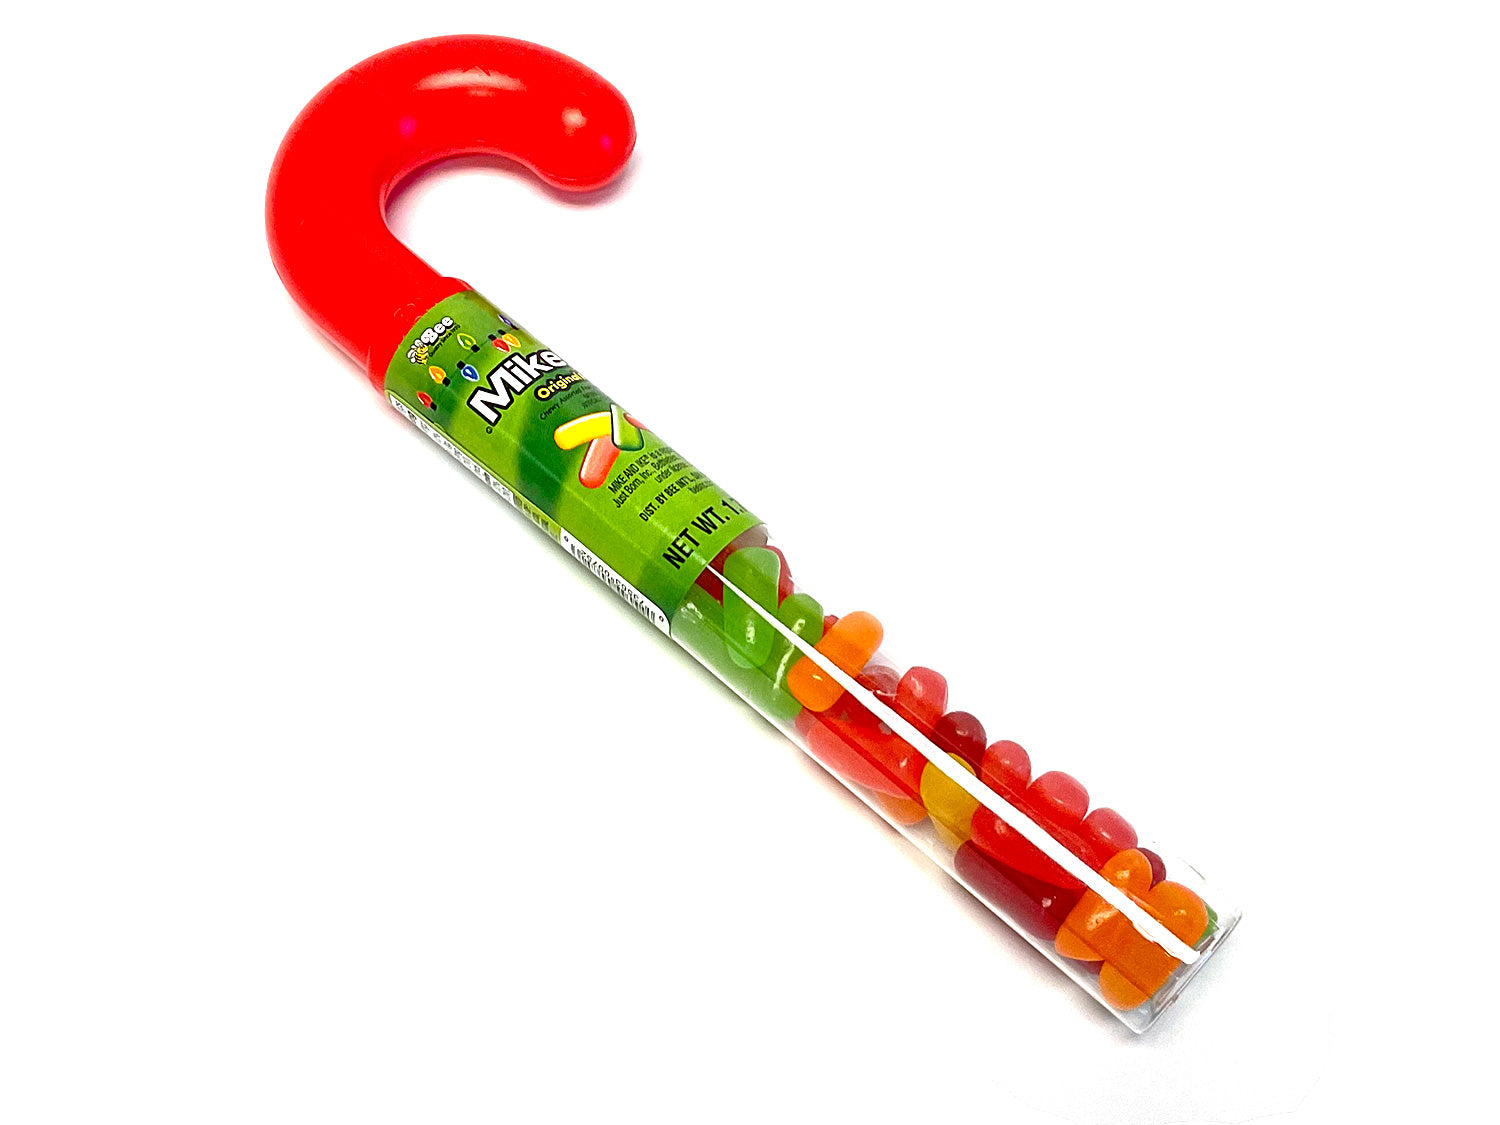 Candy Cane filled with Mike & Ike - 1.7 oz 9 inch